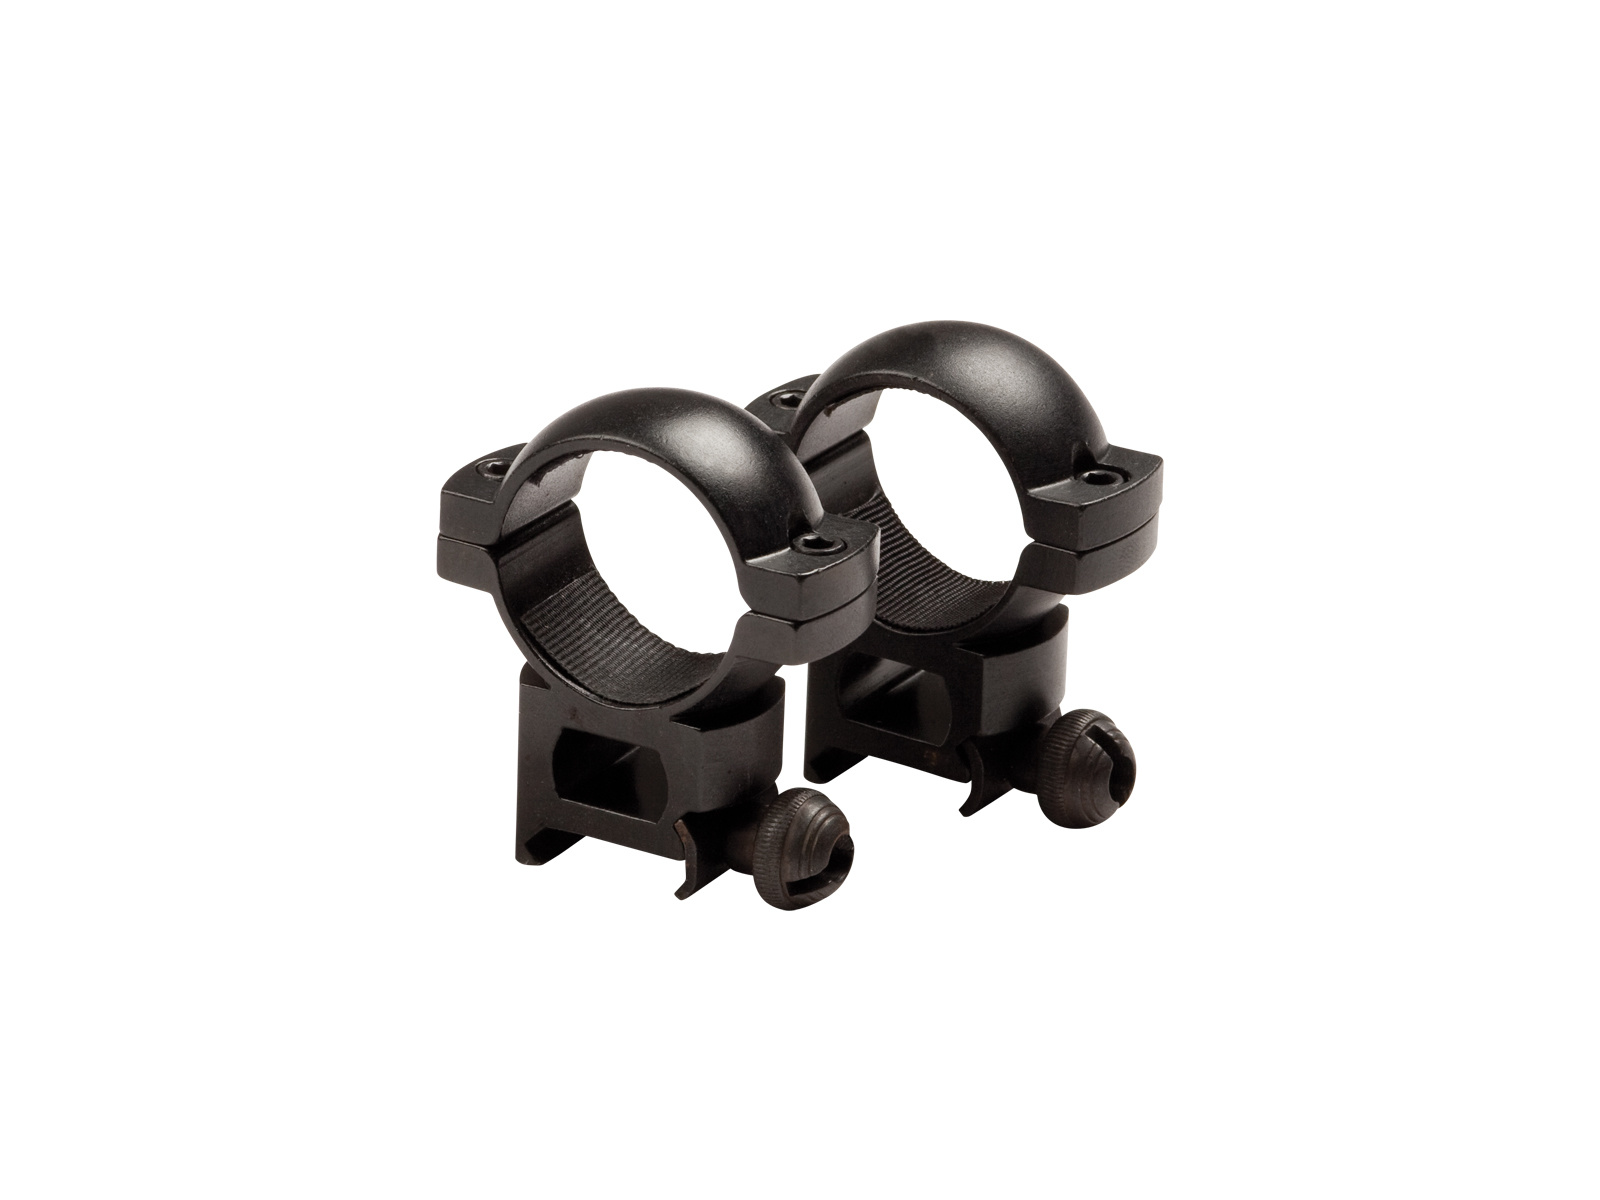 ASG 30mm ZF High Mount rings - BK